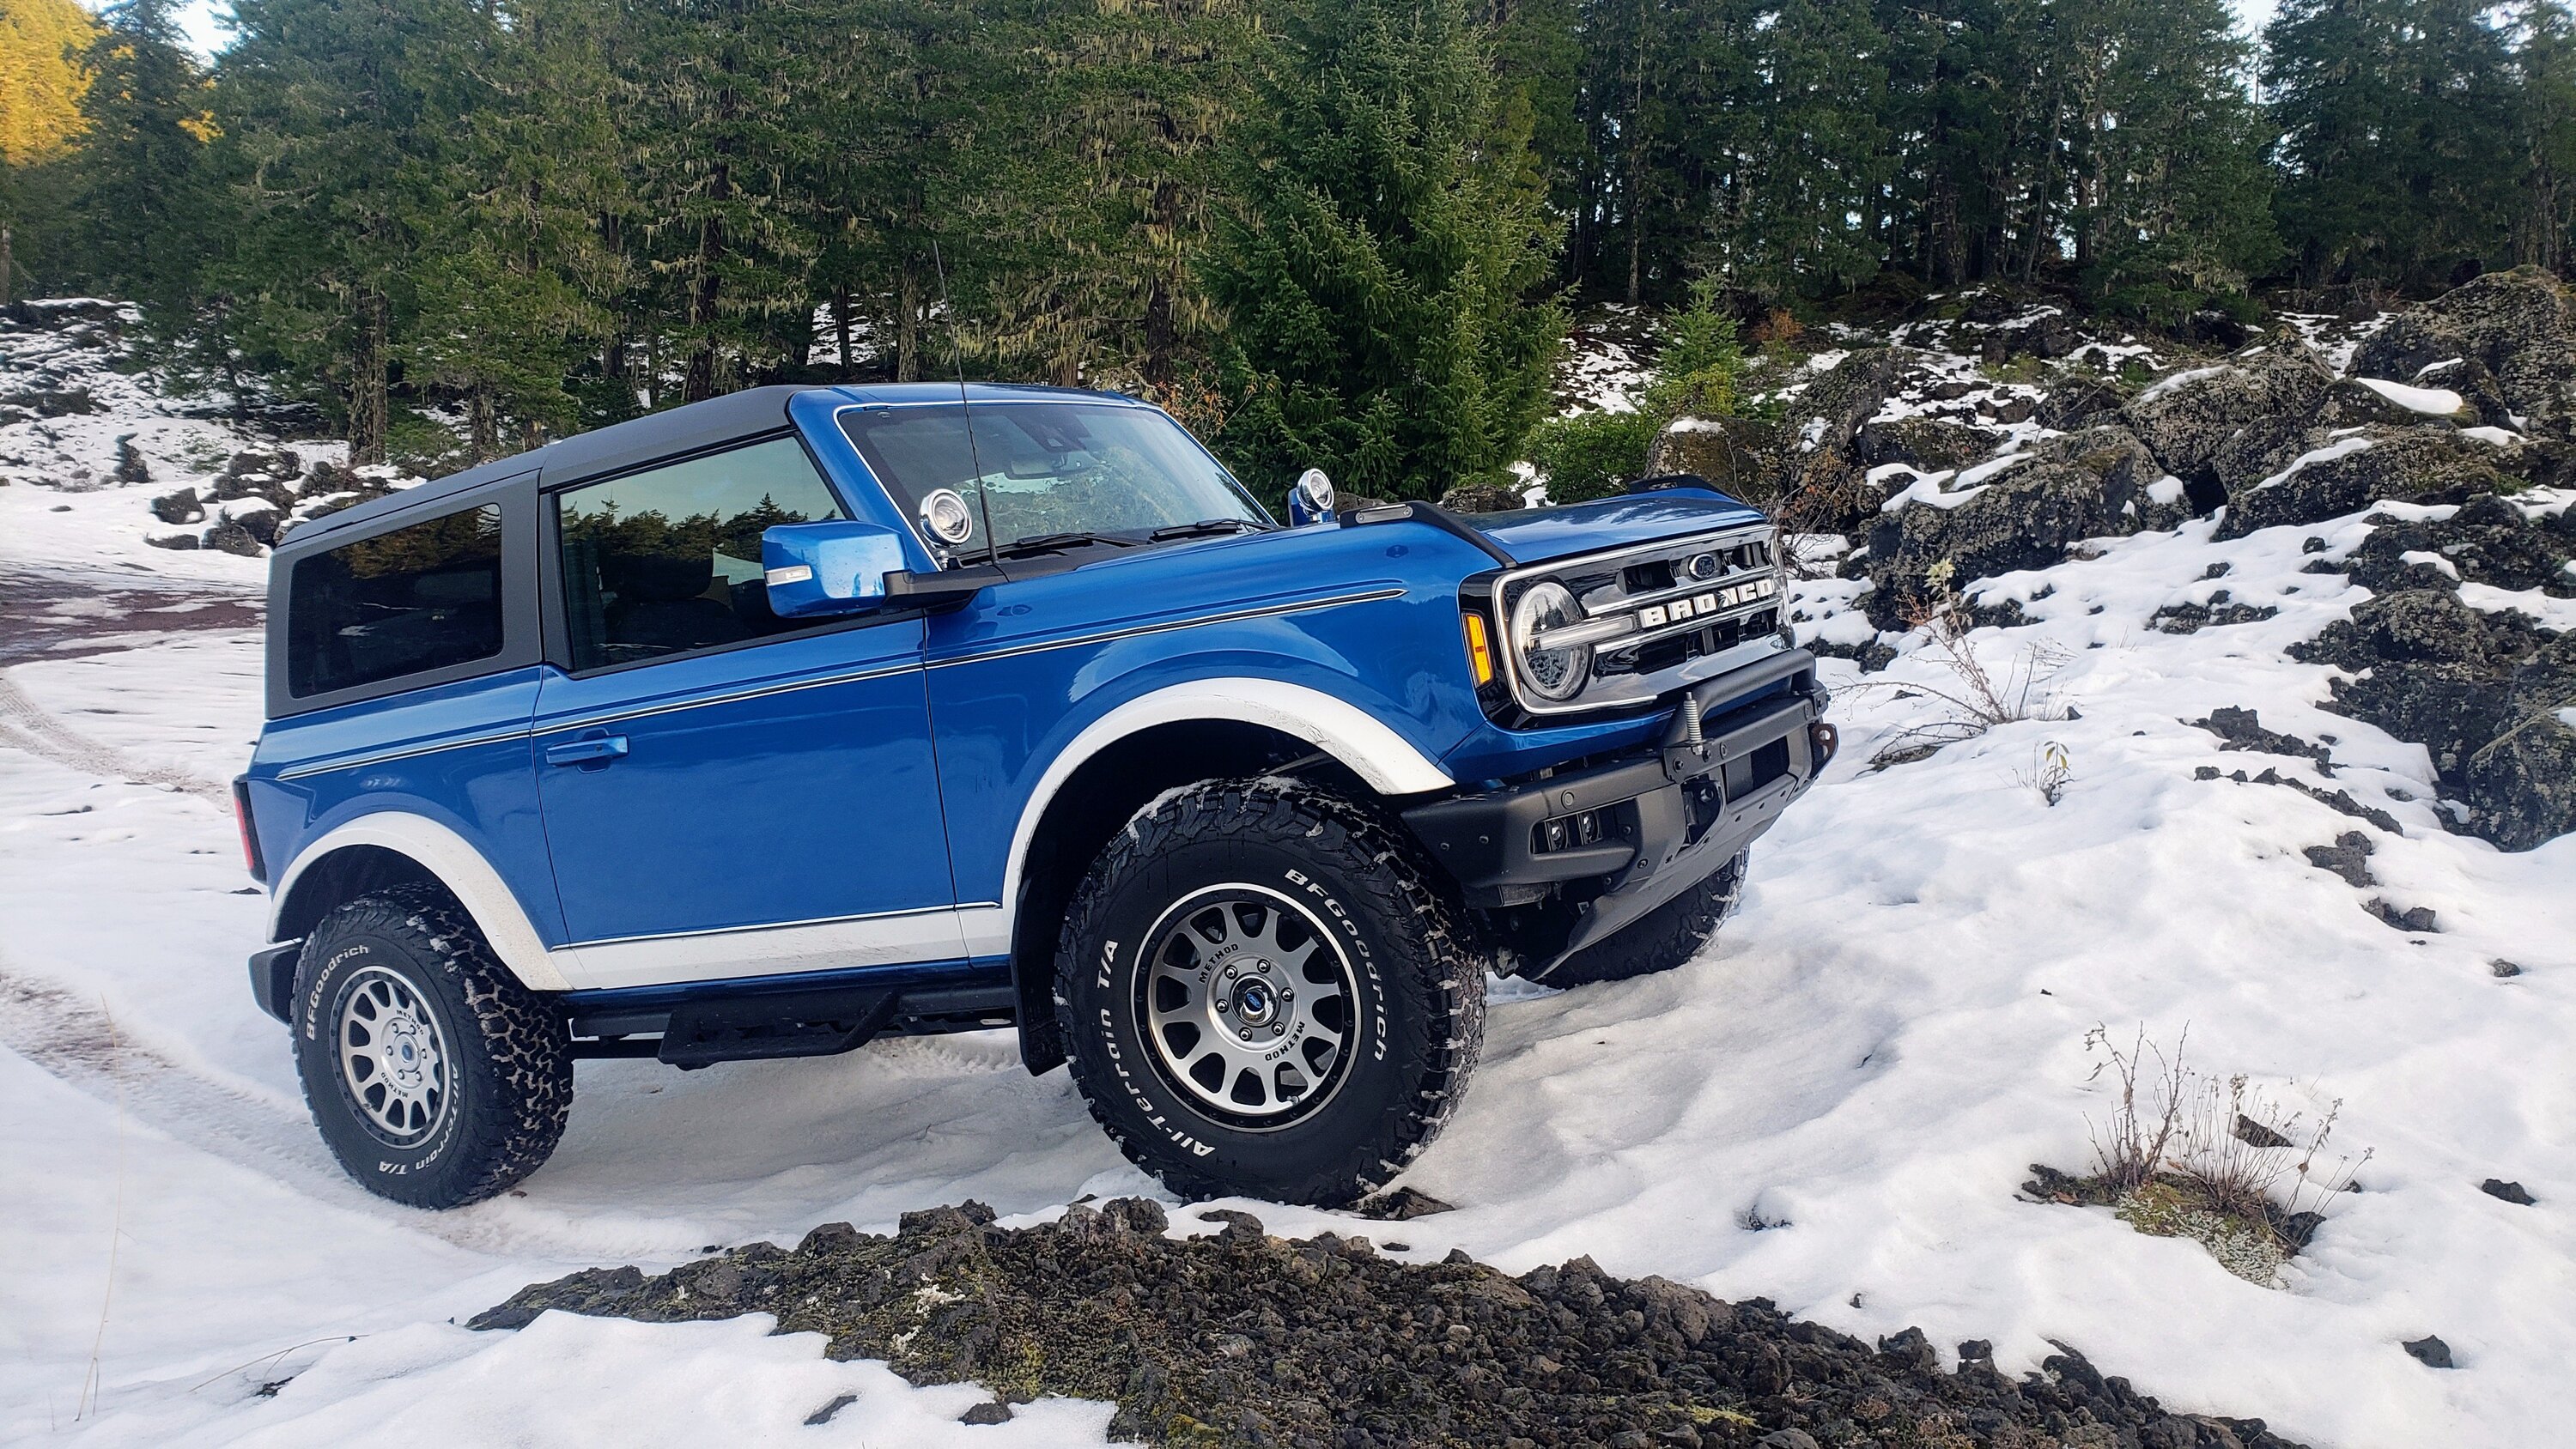 Ford Bronco Let's see your favorite Bronco picture of 2022 📸 20221124_155719